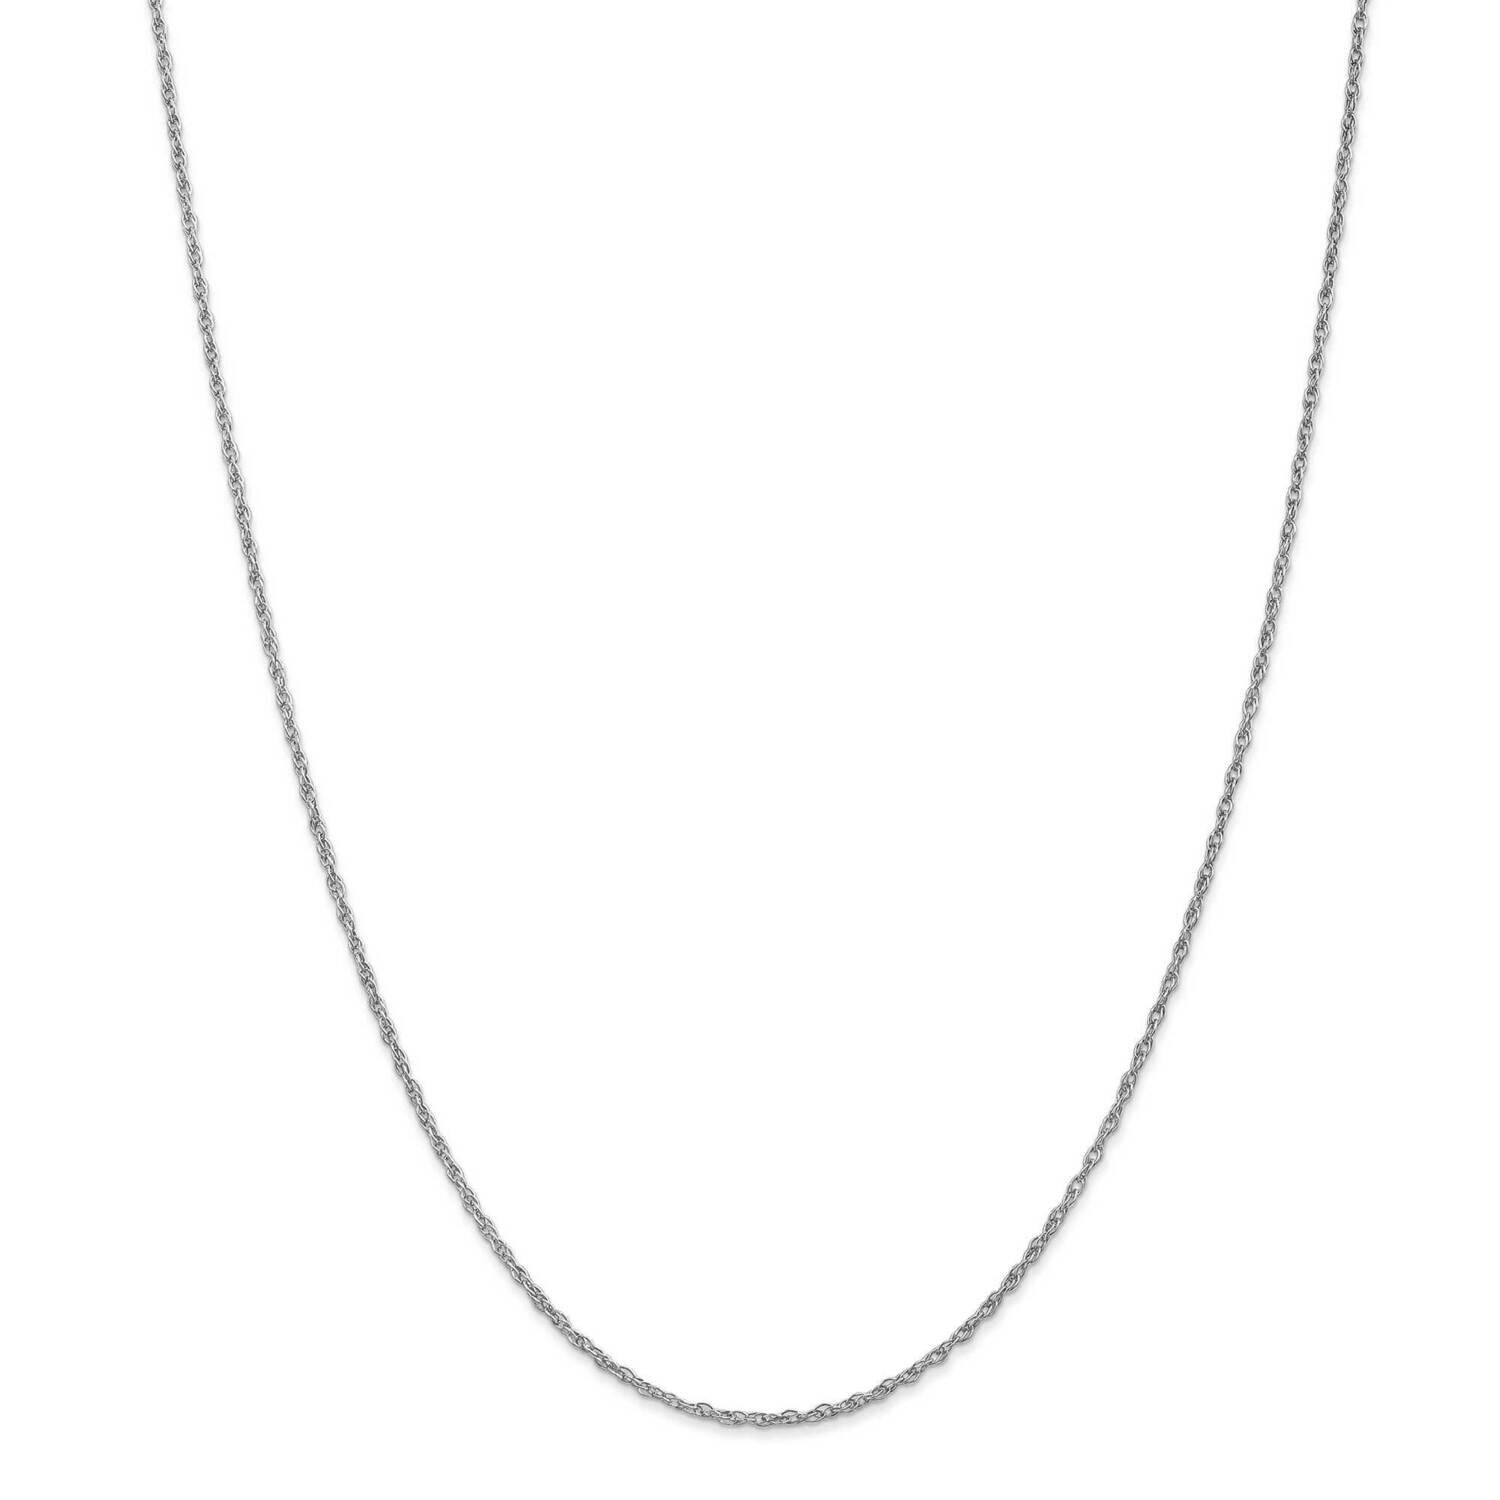 1.3mm Heavy-Baby Rope Chain 22 Inch 14k White Gold PEN90-22